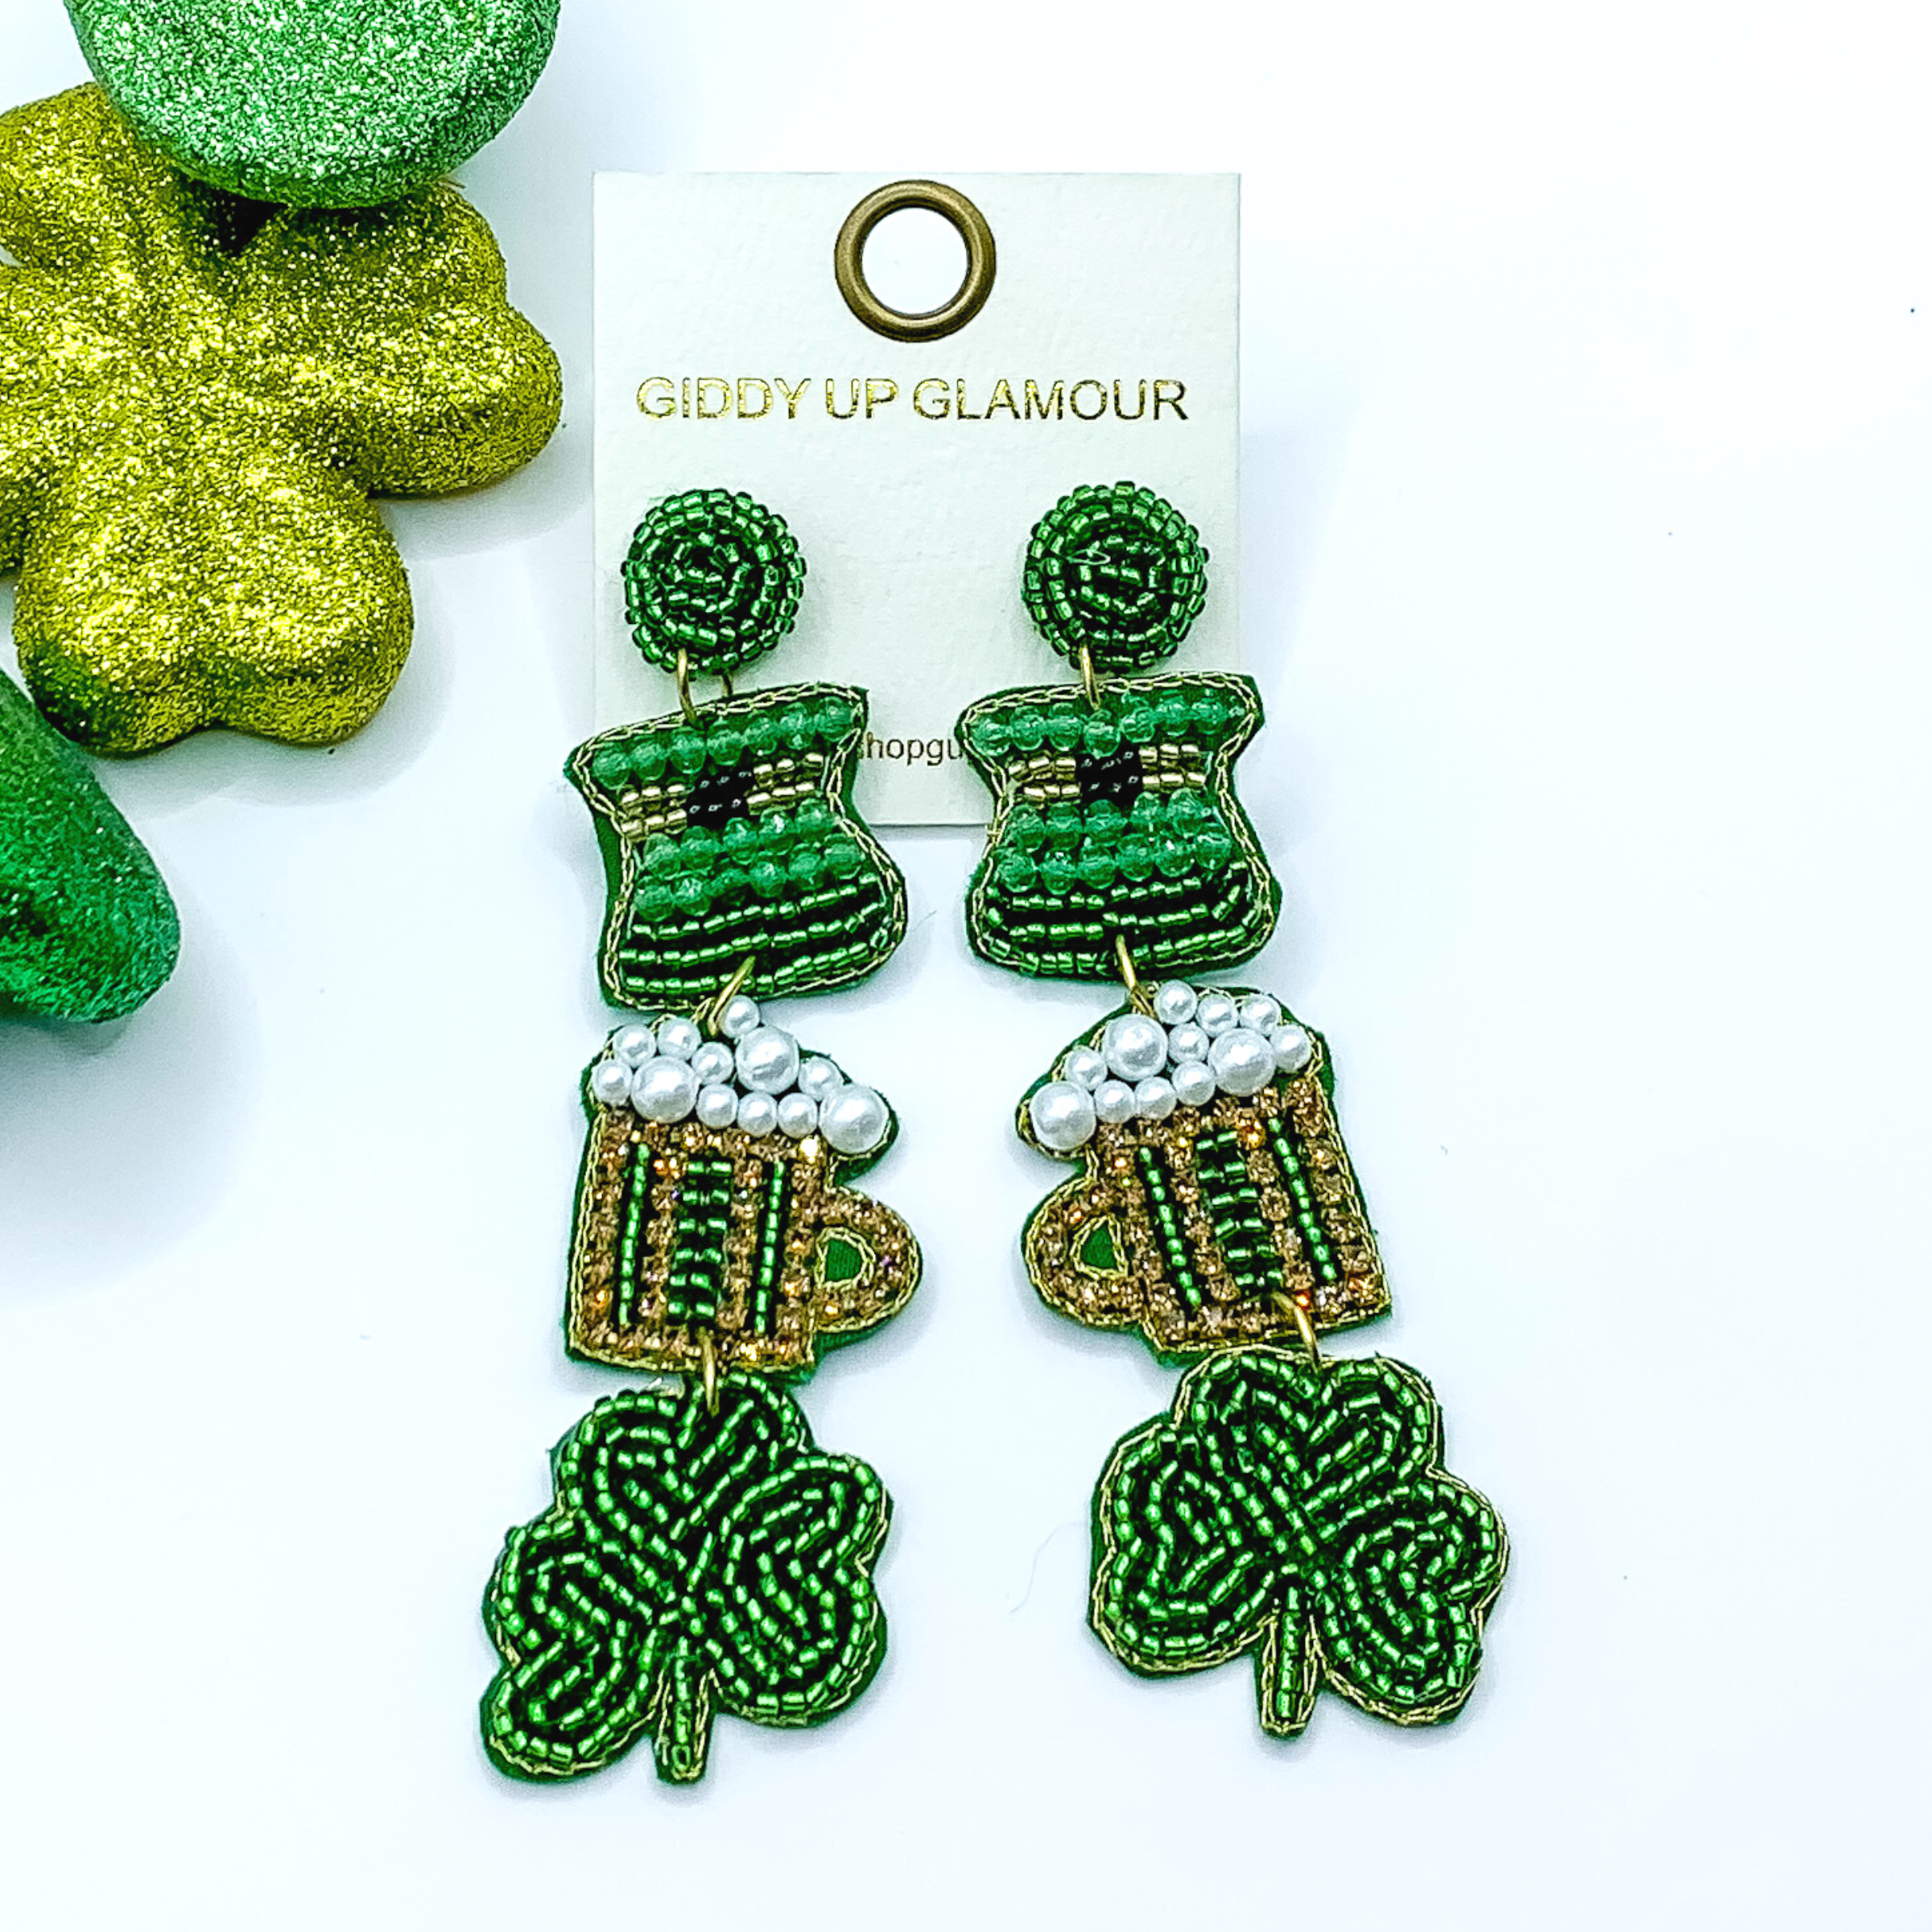 Green beaded drop earrings. These earrings include a green pot, a crystal beaded mug, and beaded clover. These earrings are pictured on a white background with green decor in the top left corner. 